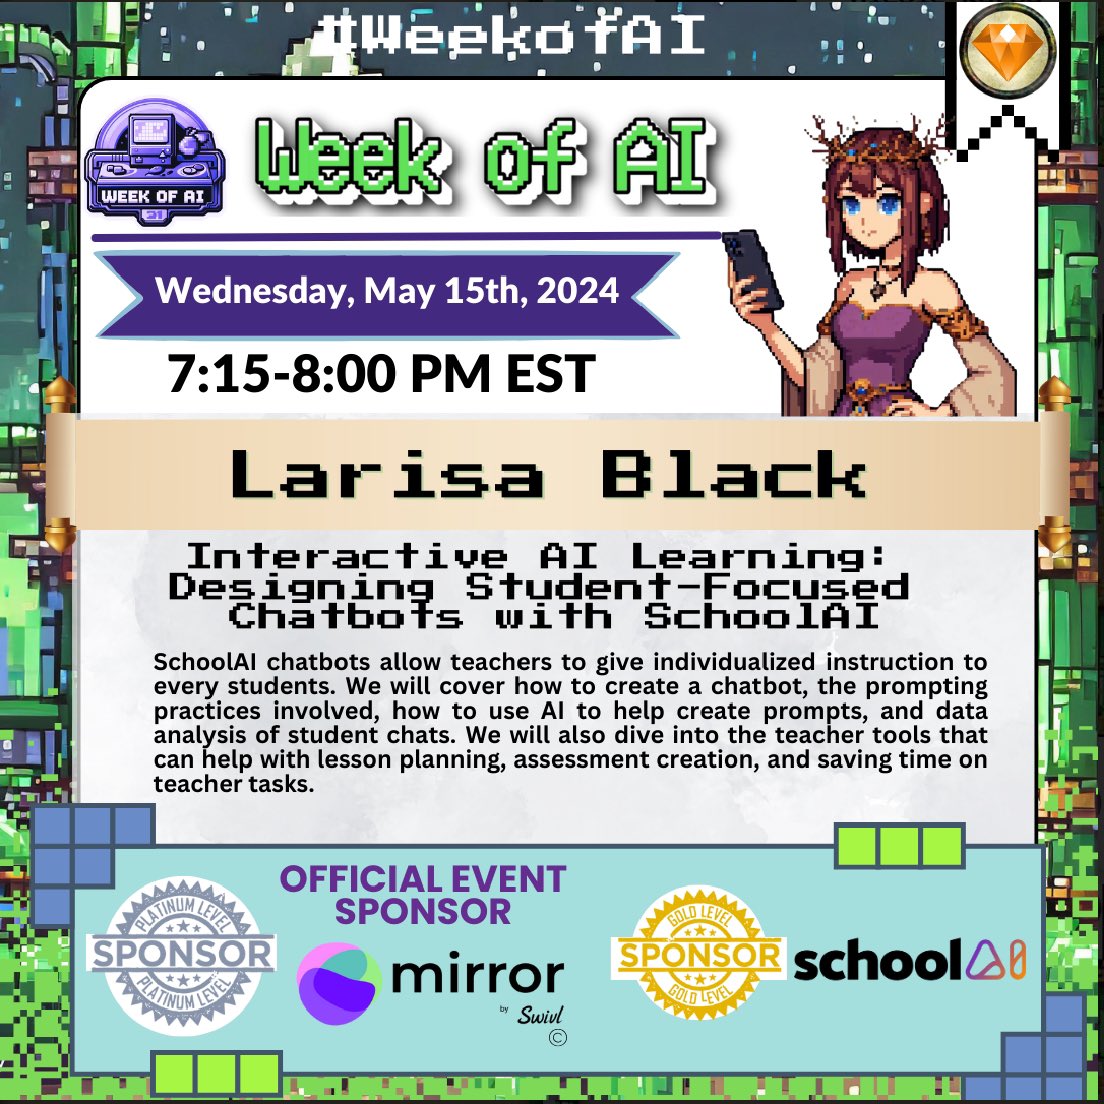 👩‍🏫 Want to learn more about how to create Chatbots to help personalize learning for your students? Join me for #weekofai at 7:15pm as I share one of the coolest features at @getschoolai 🤩 weekofai.ai #ai #teachers #chatbots #pd #personalizelearning #eduguardians